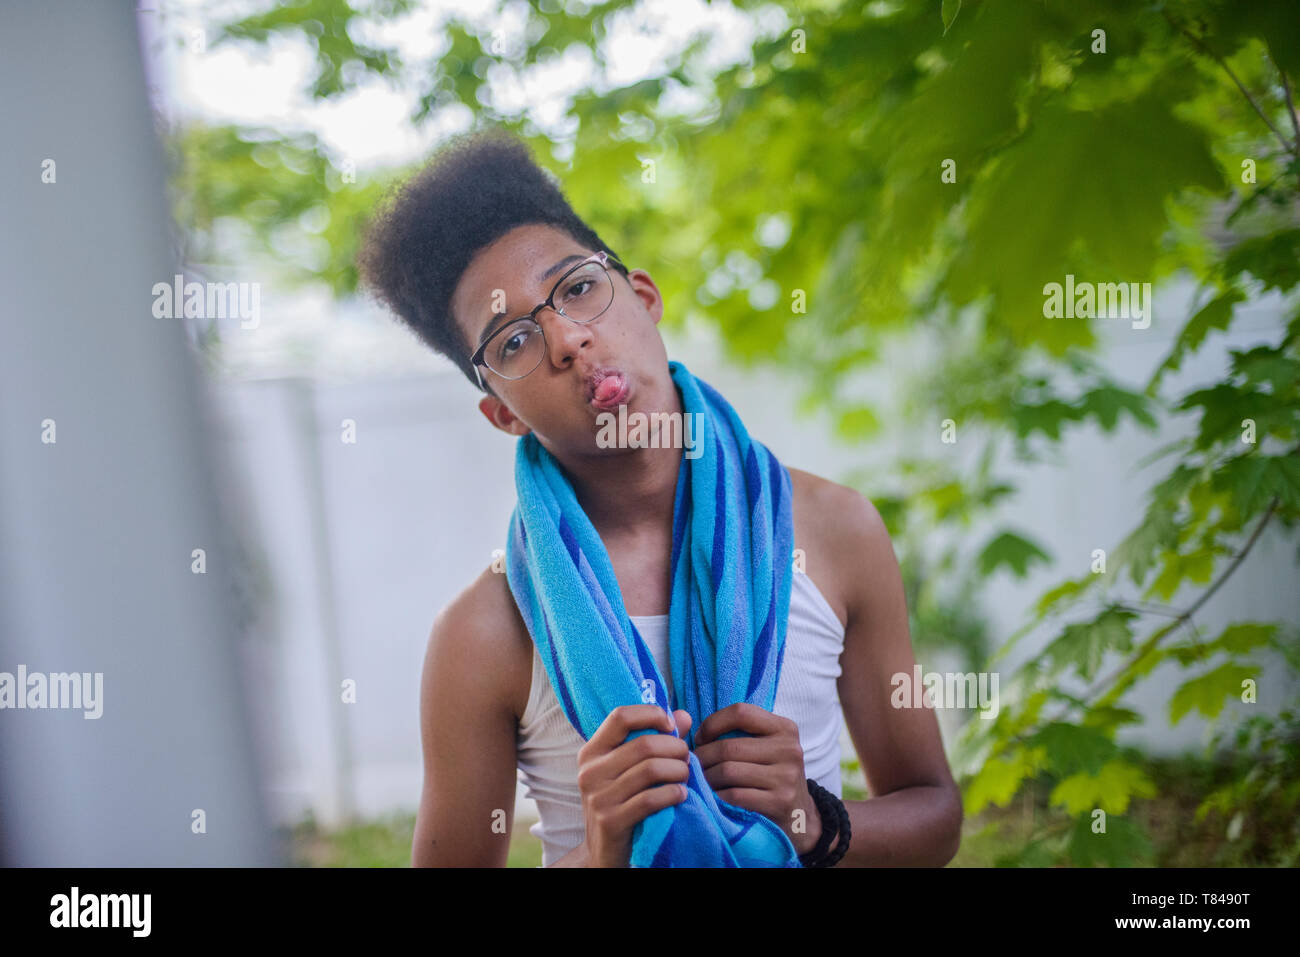 Teenage boy with afro flat top hairstyle sticking out tongue in garden, portrait Stock Photo